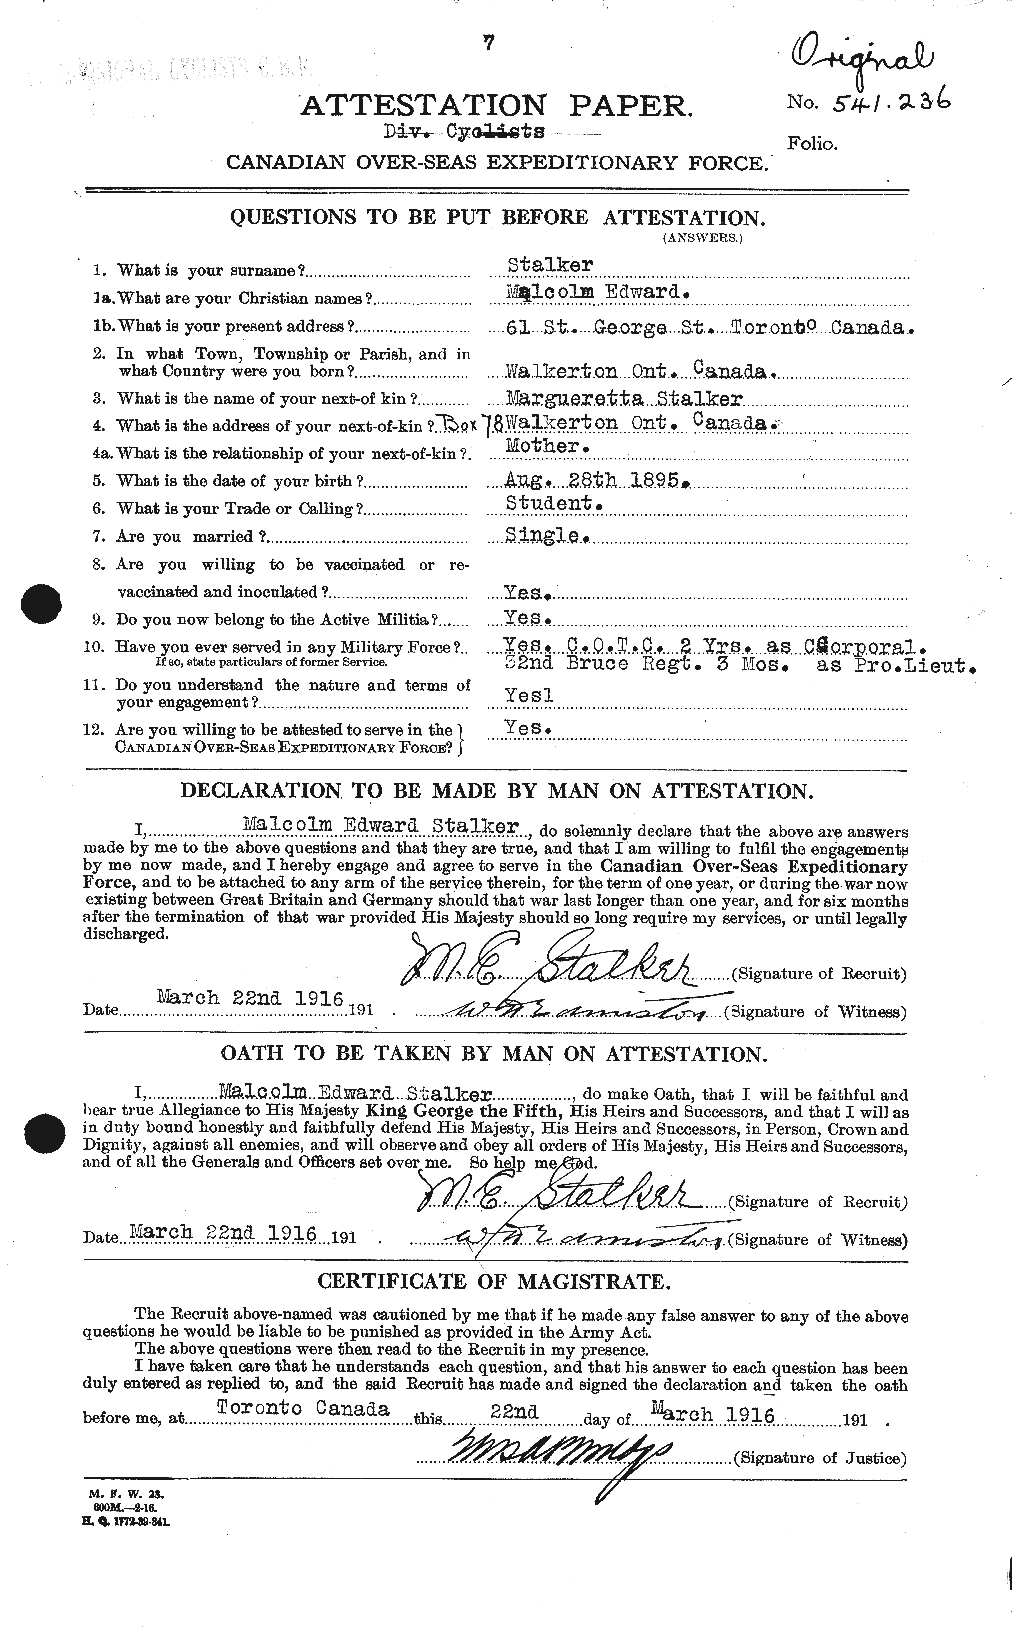 Personnel Records of the First World War - CEF 622834a